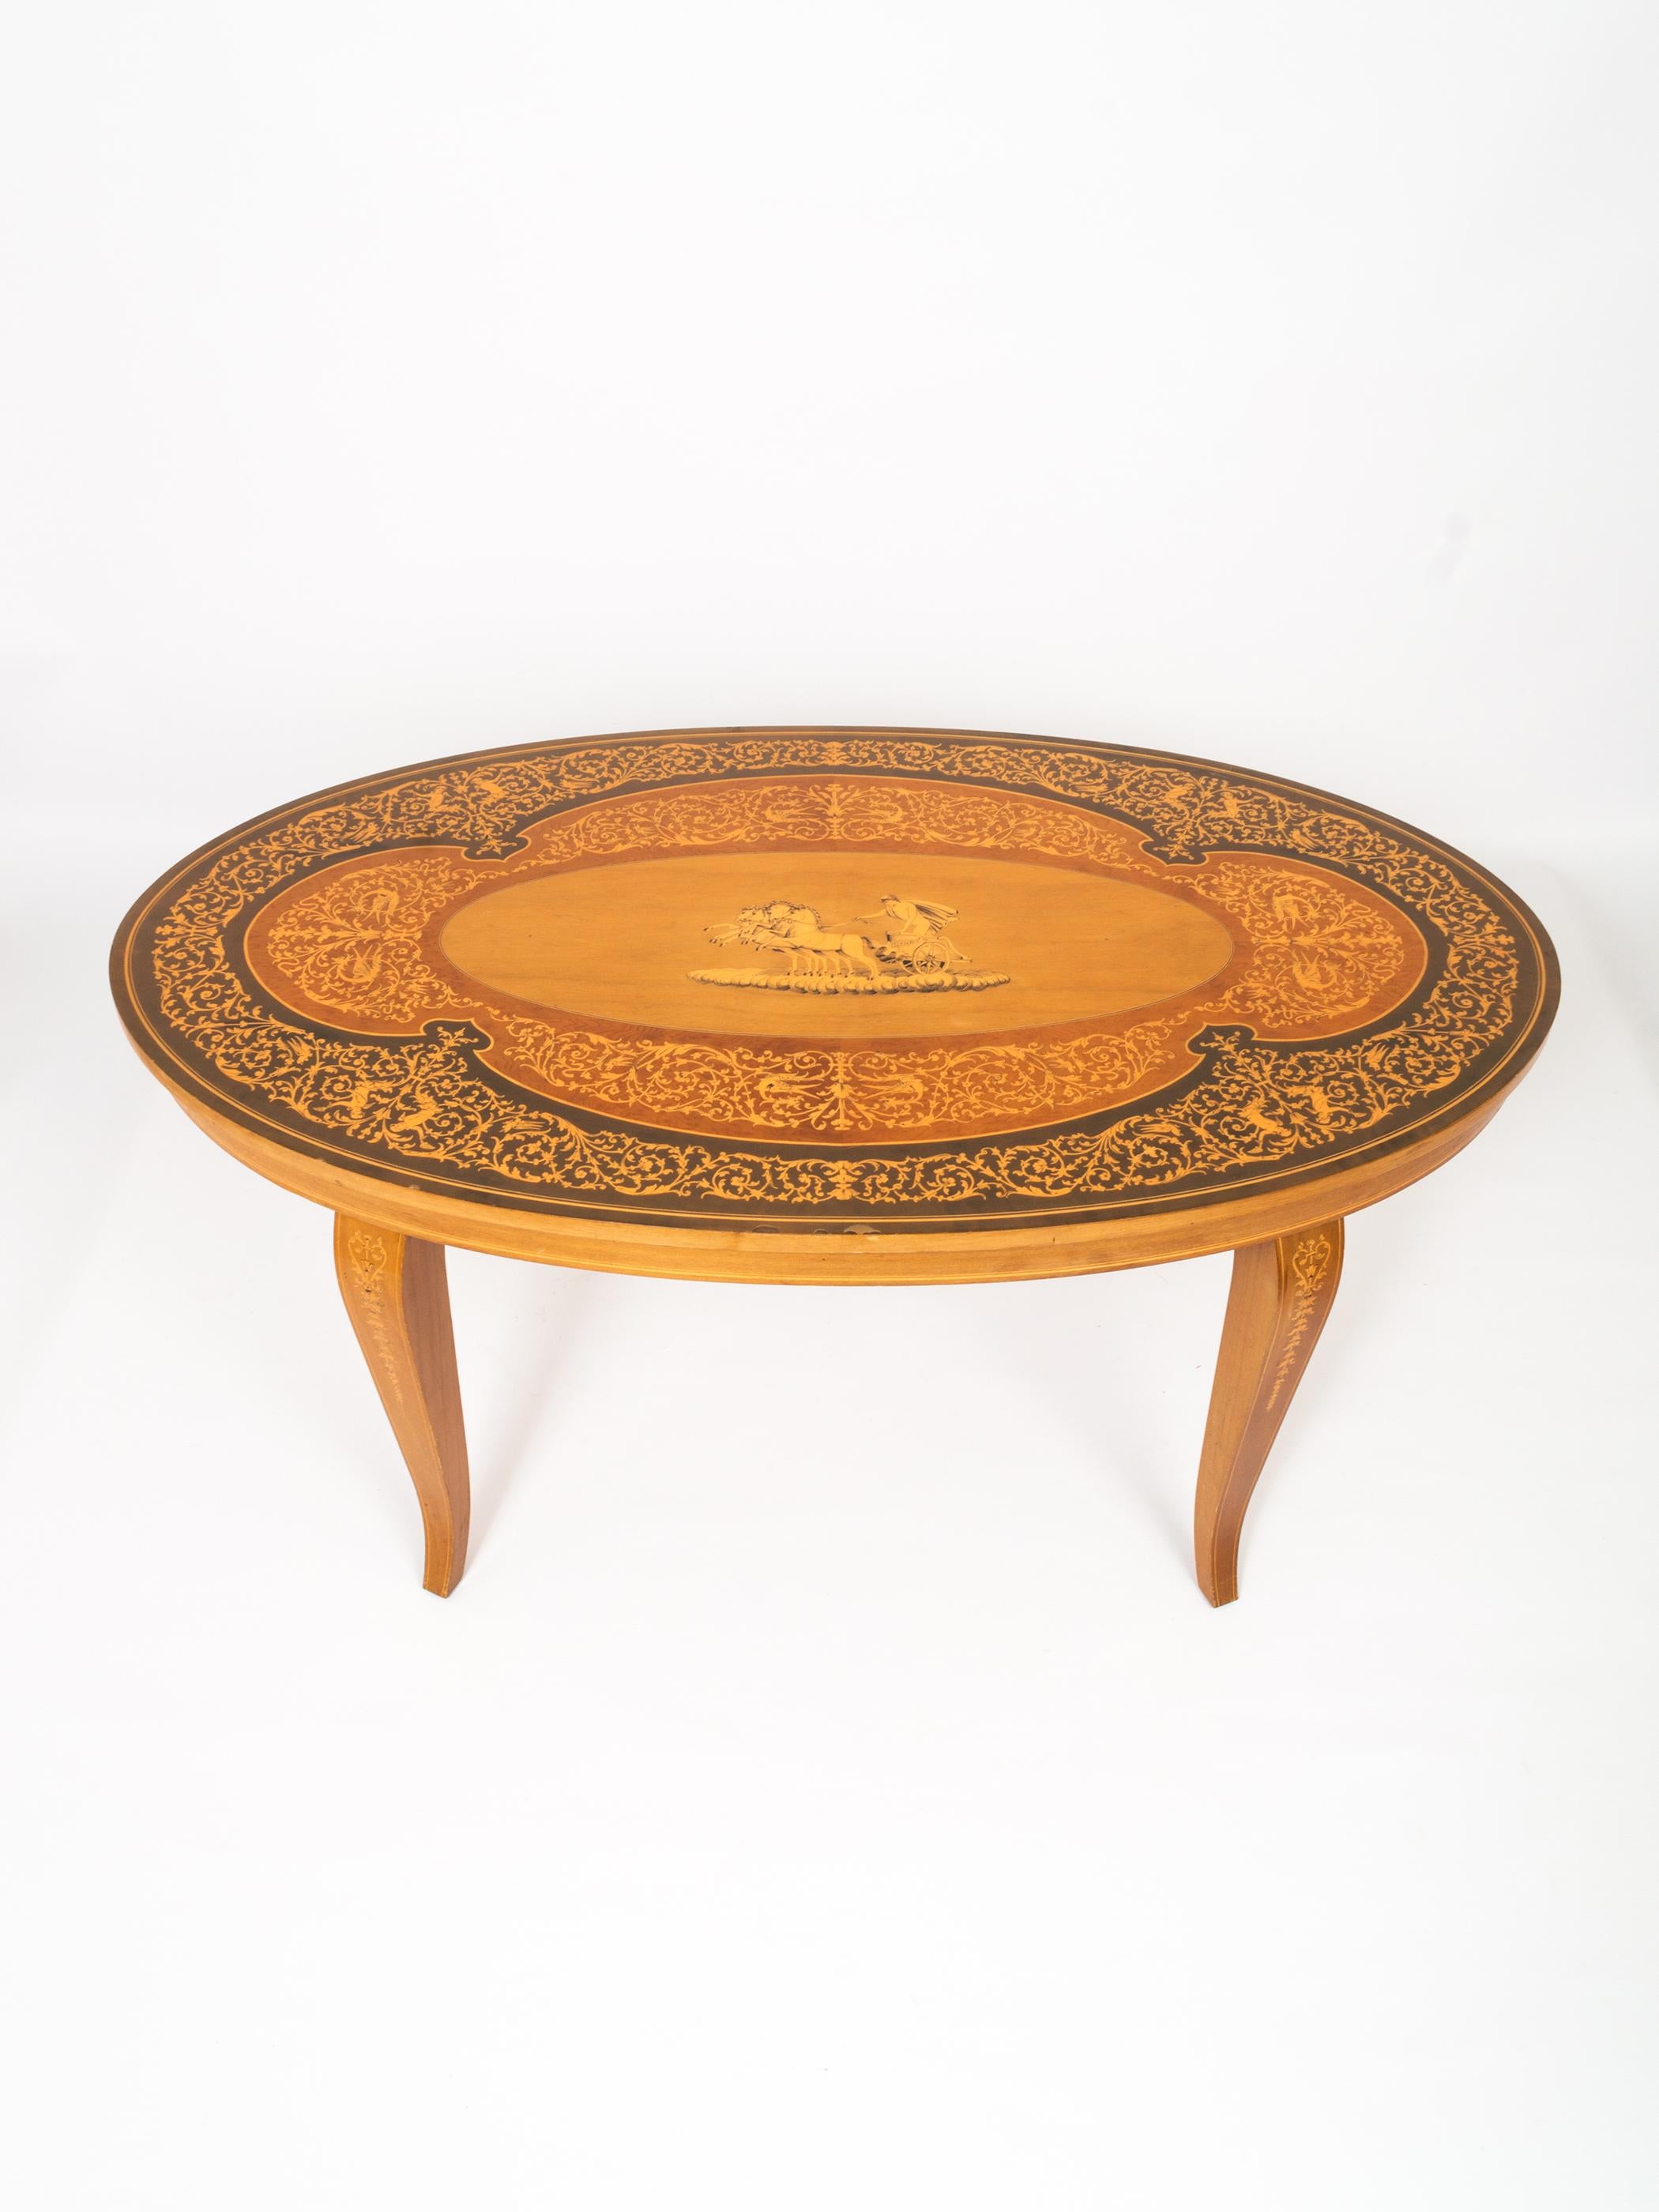 Italian Inlaid Lacquered Marquetry Coffee Table Sorrento Italy, C.1960 For Sale 1